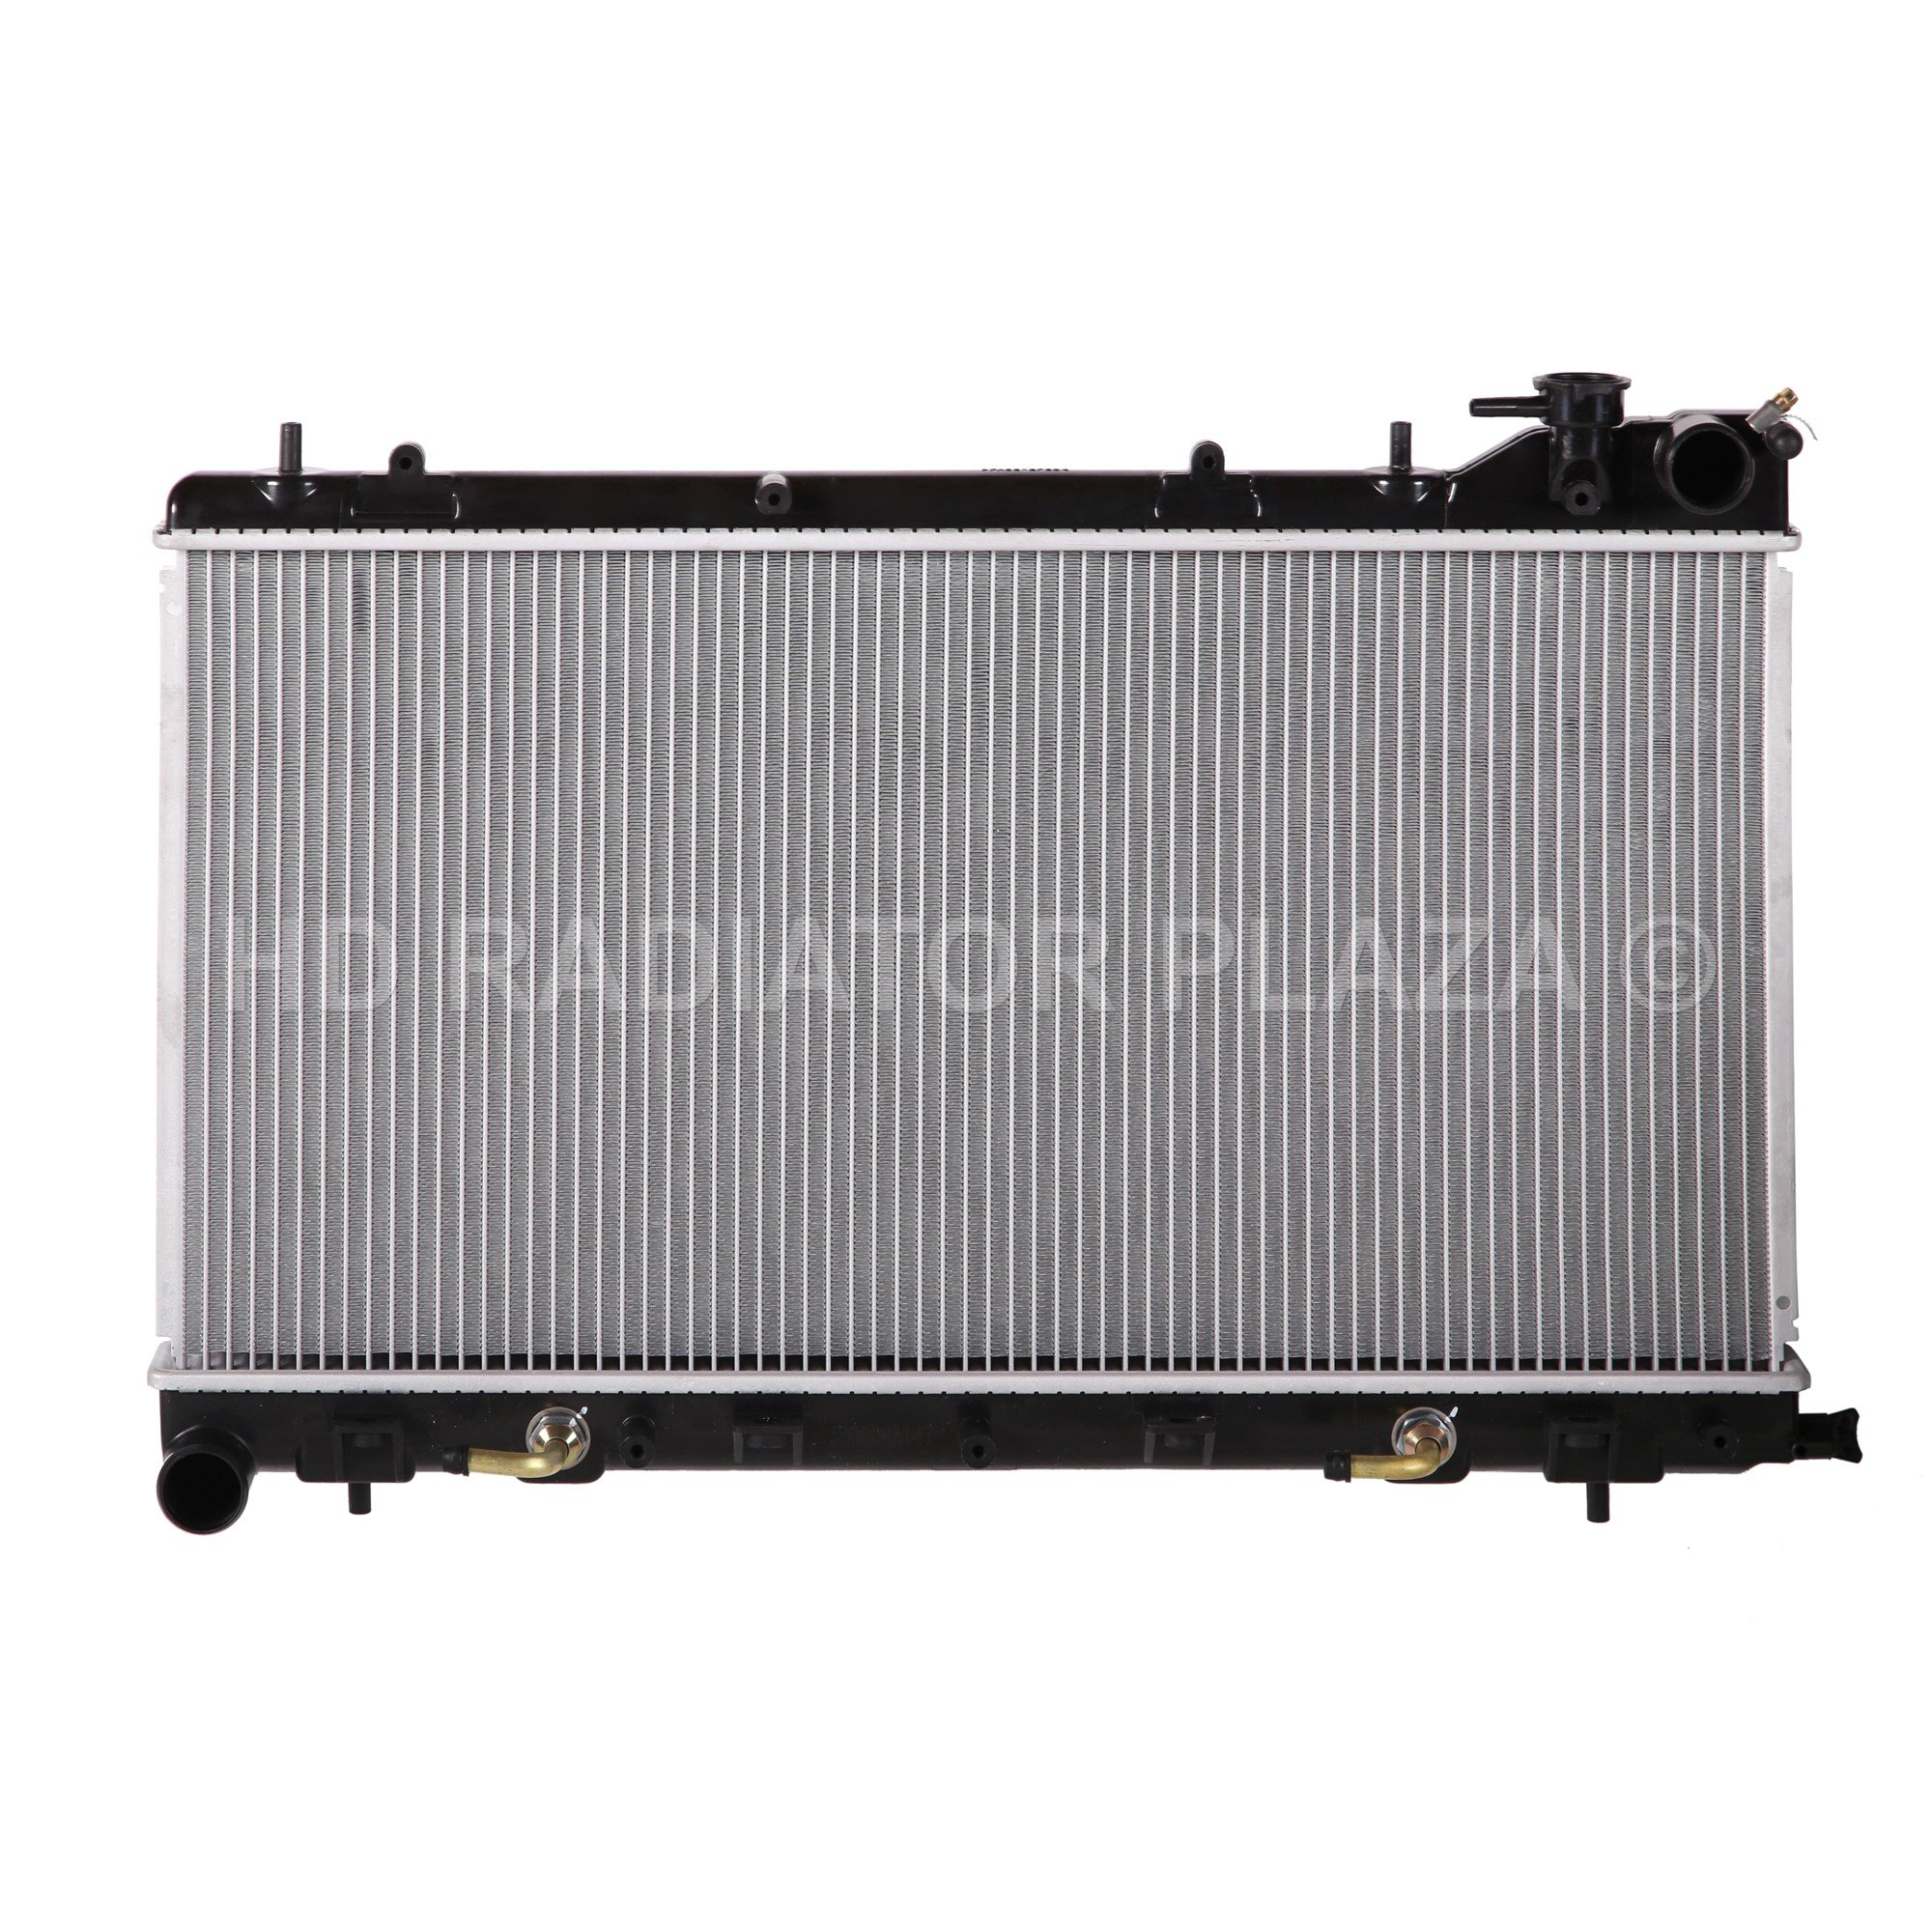 Radiator for 06-08 Subaru Forester, 2.5L H4